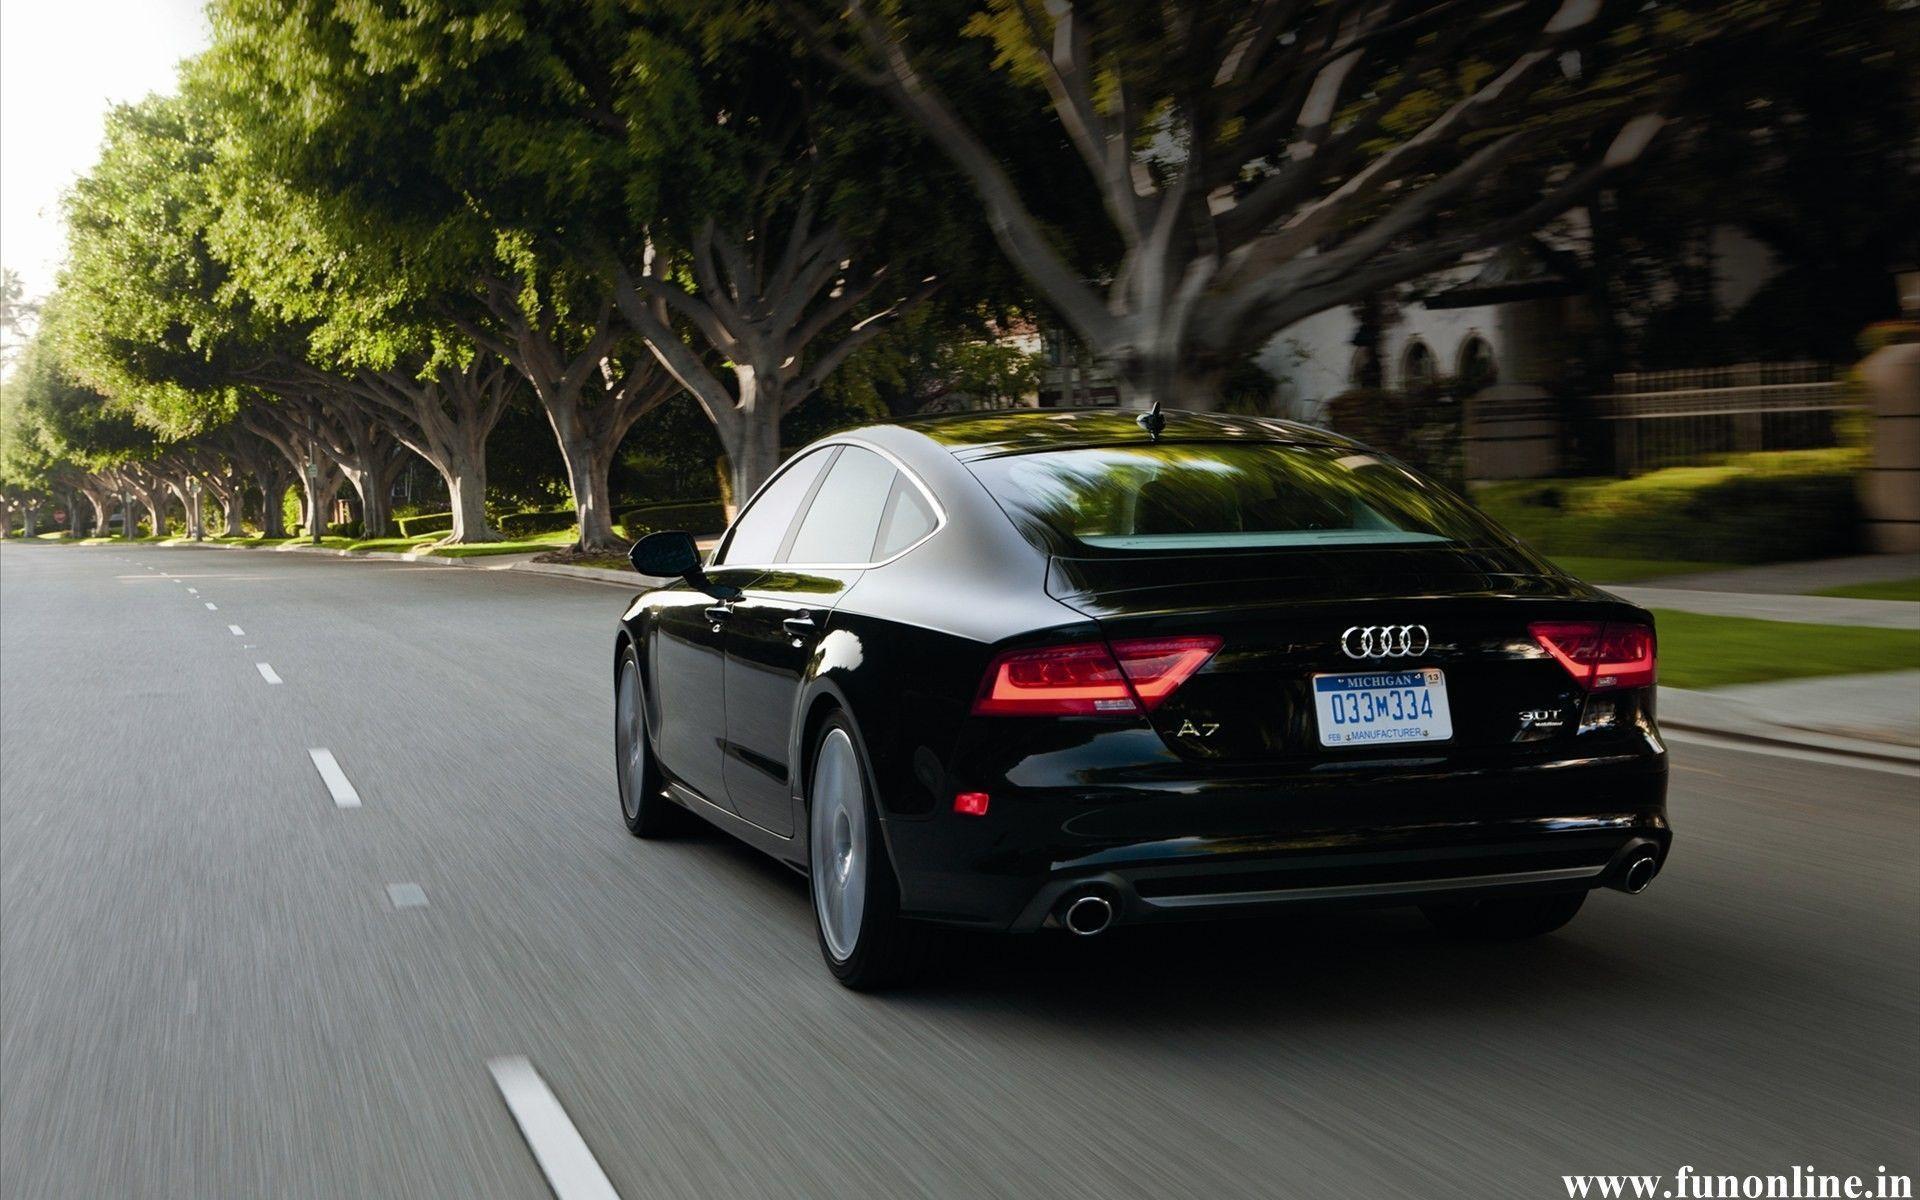 Audi A7 Wallpaper, Full HDQ Audi A7 Picture and Wallpaper